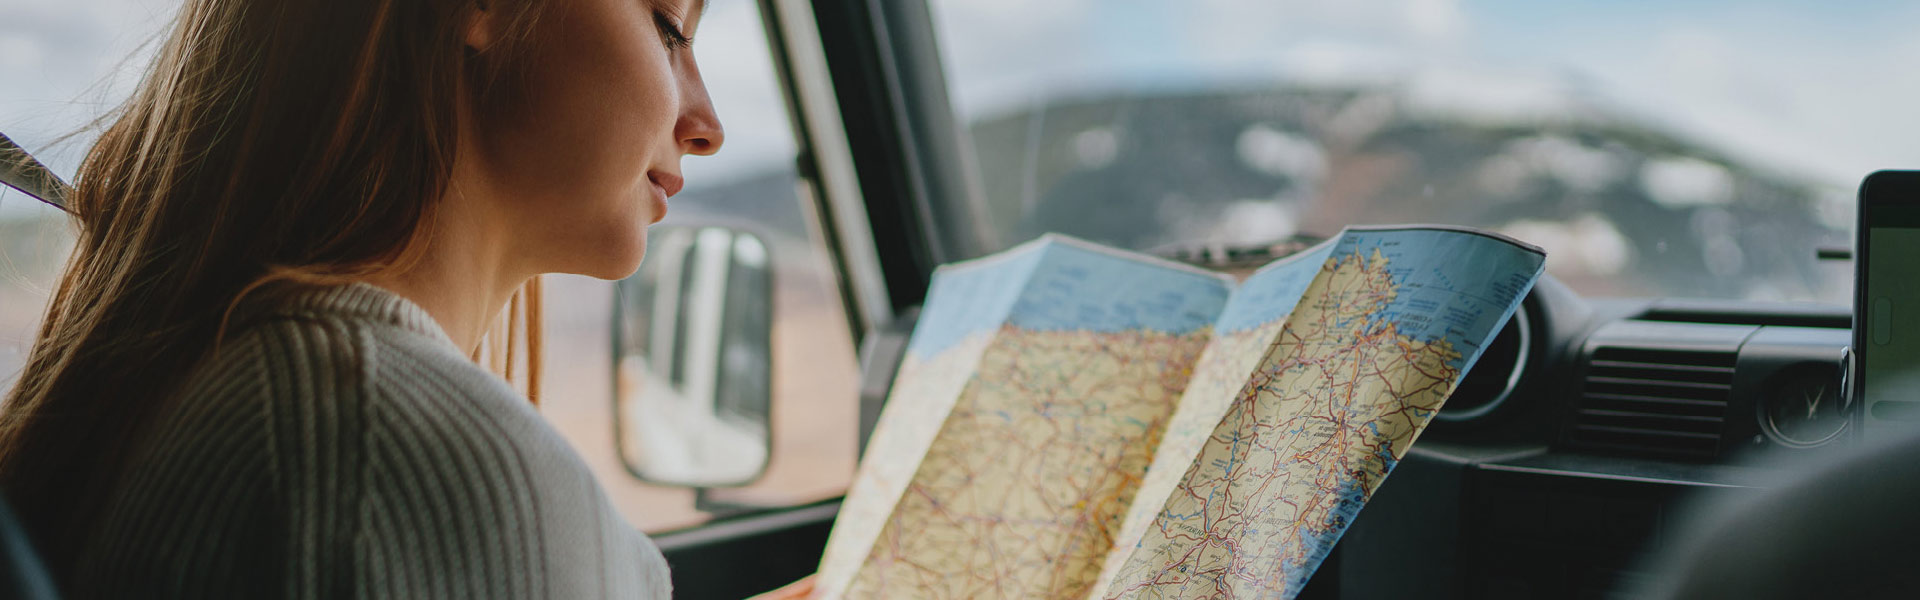 woman looking at map on road trip